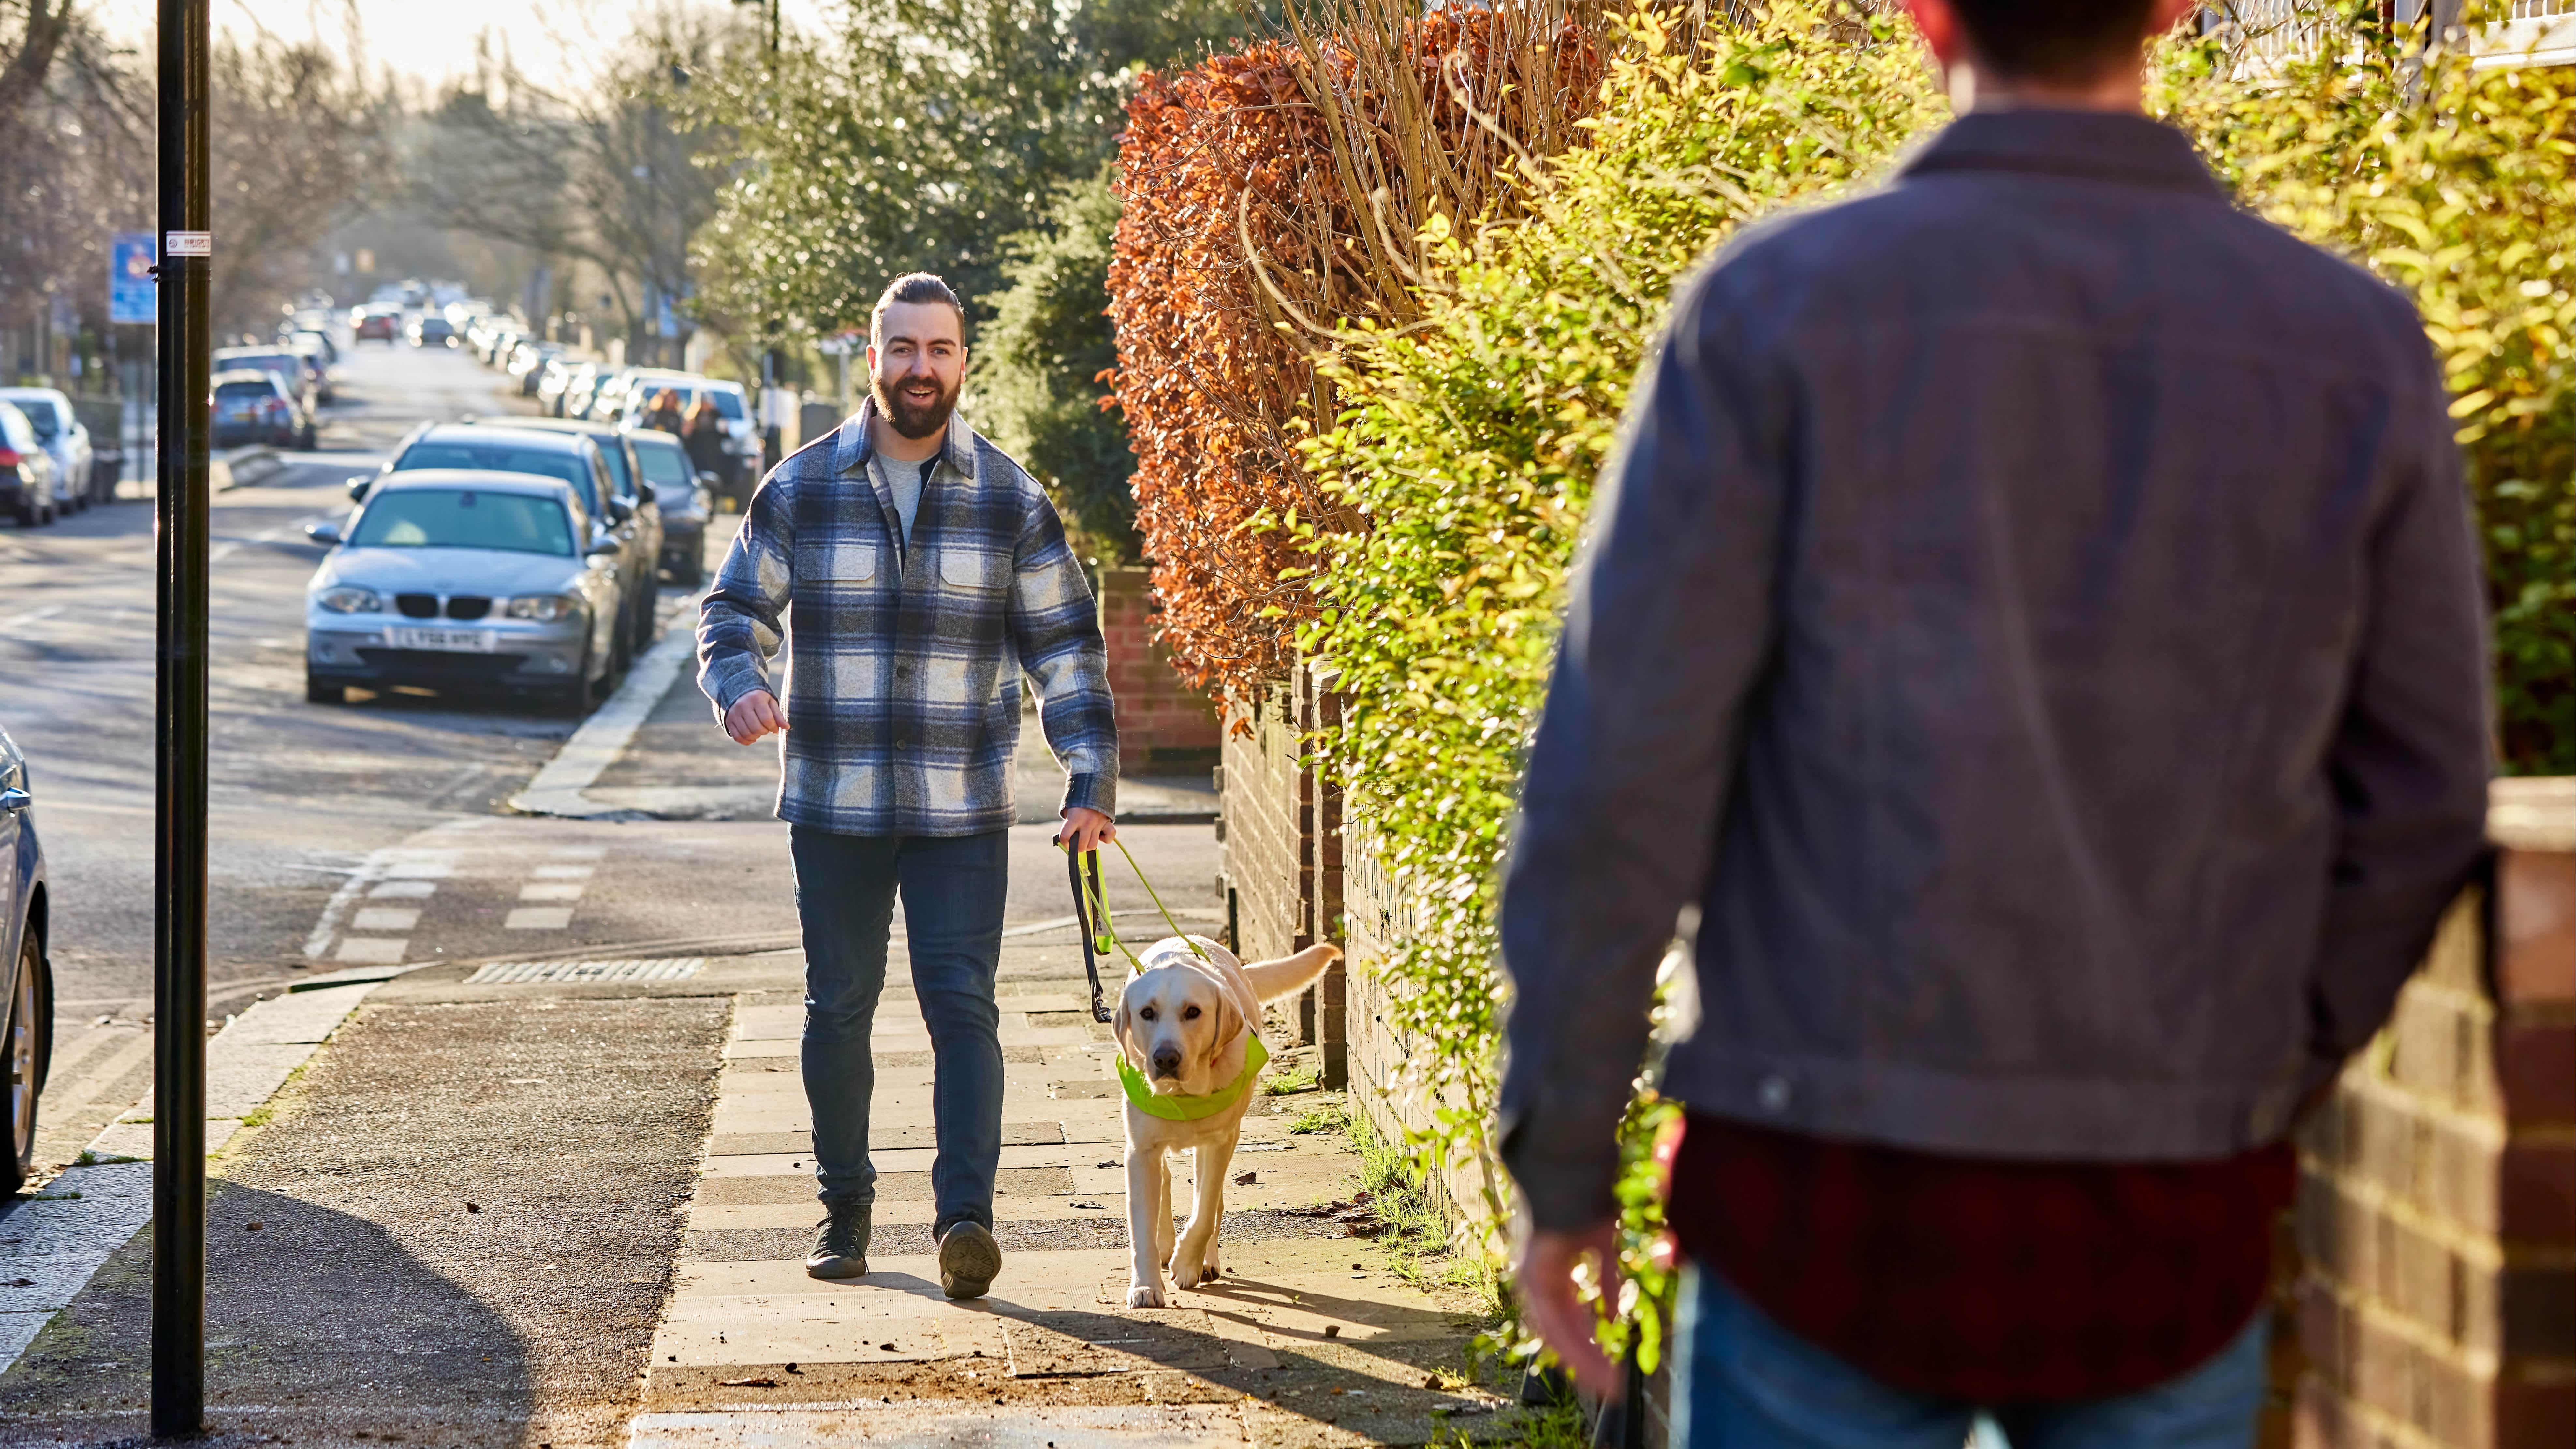 In the foreground we see the back of a man wearing a denim jacket. He is facing his brother, a man with a beard wearing a checked shirt, who is walking up the road with his guide dog, a yellow labrador in a Guide Dogs harness.